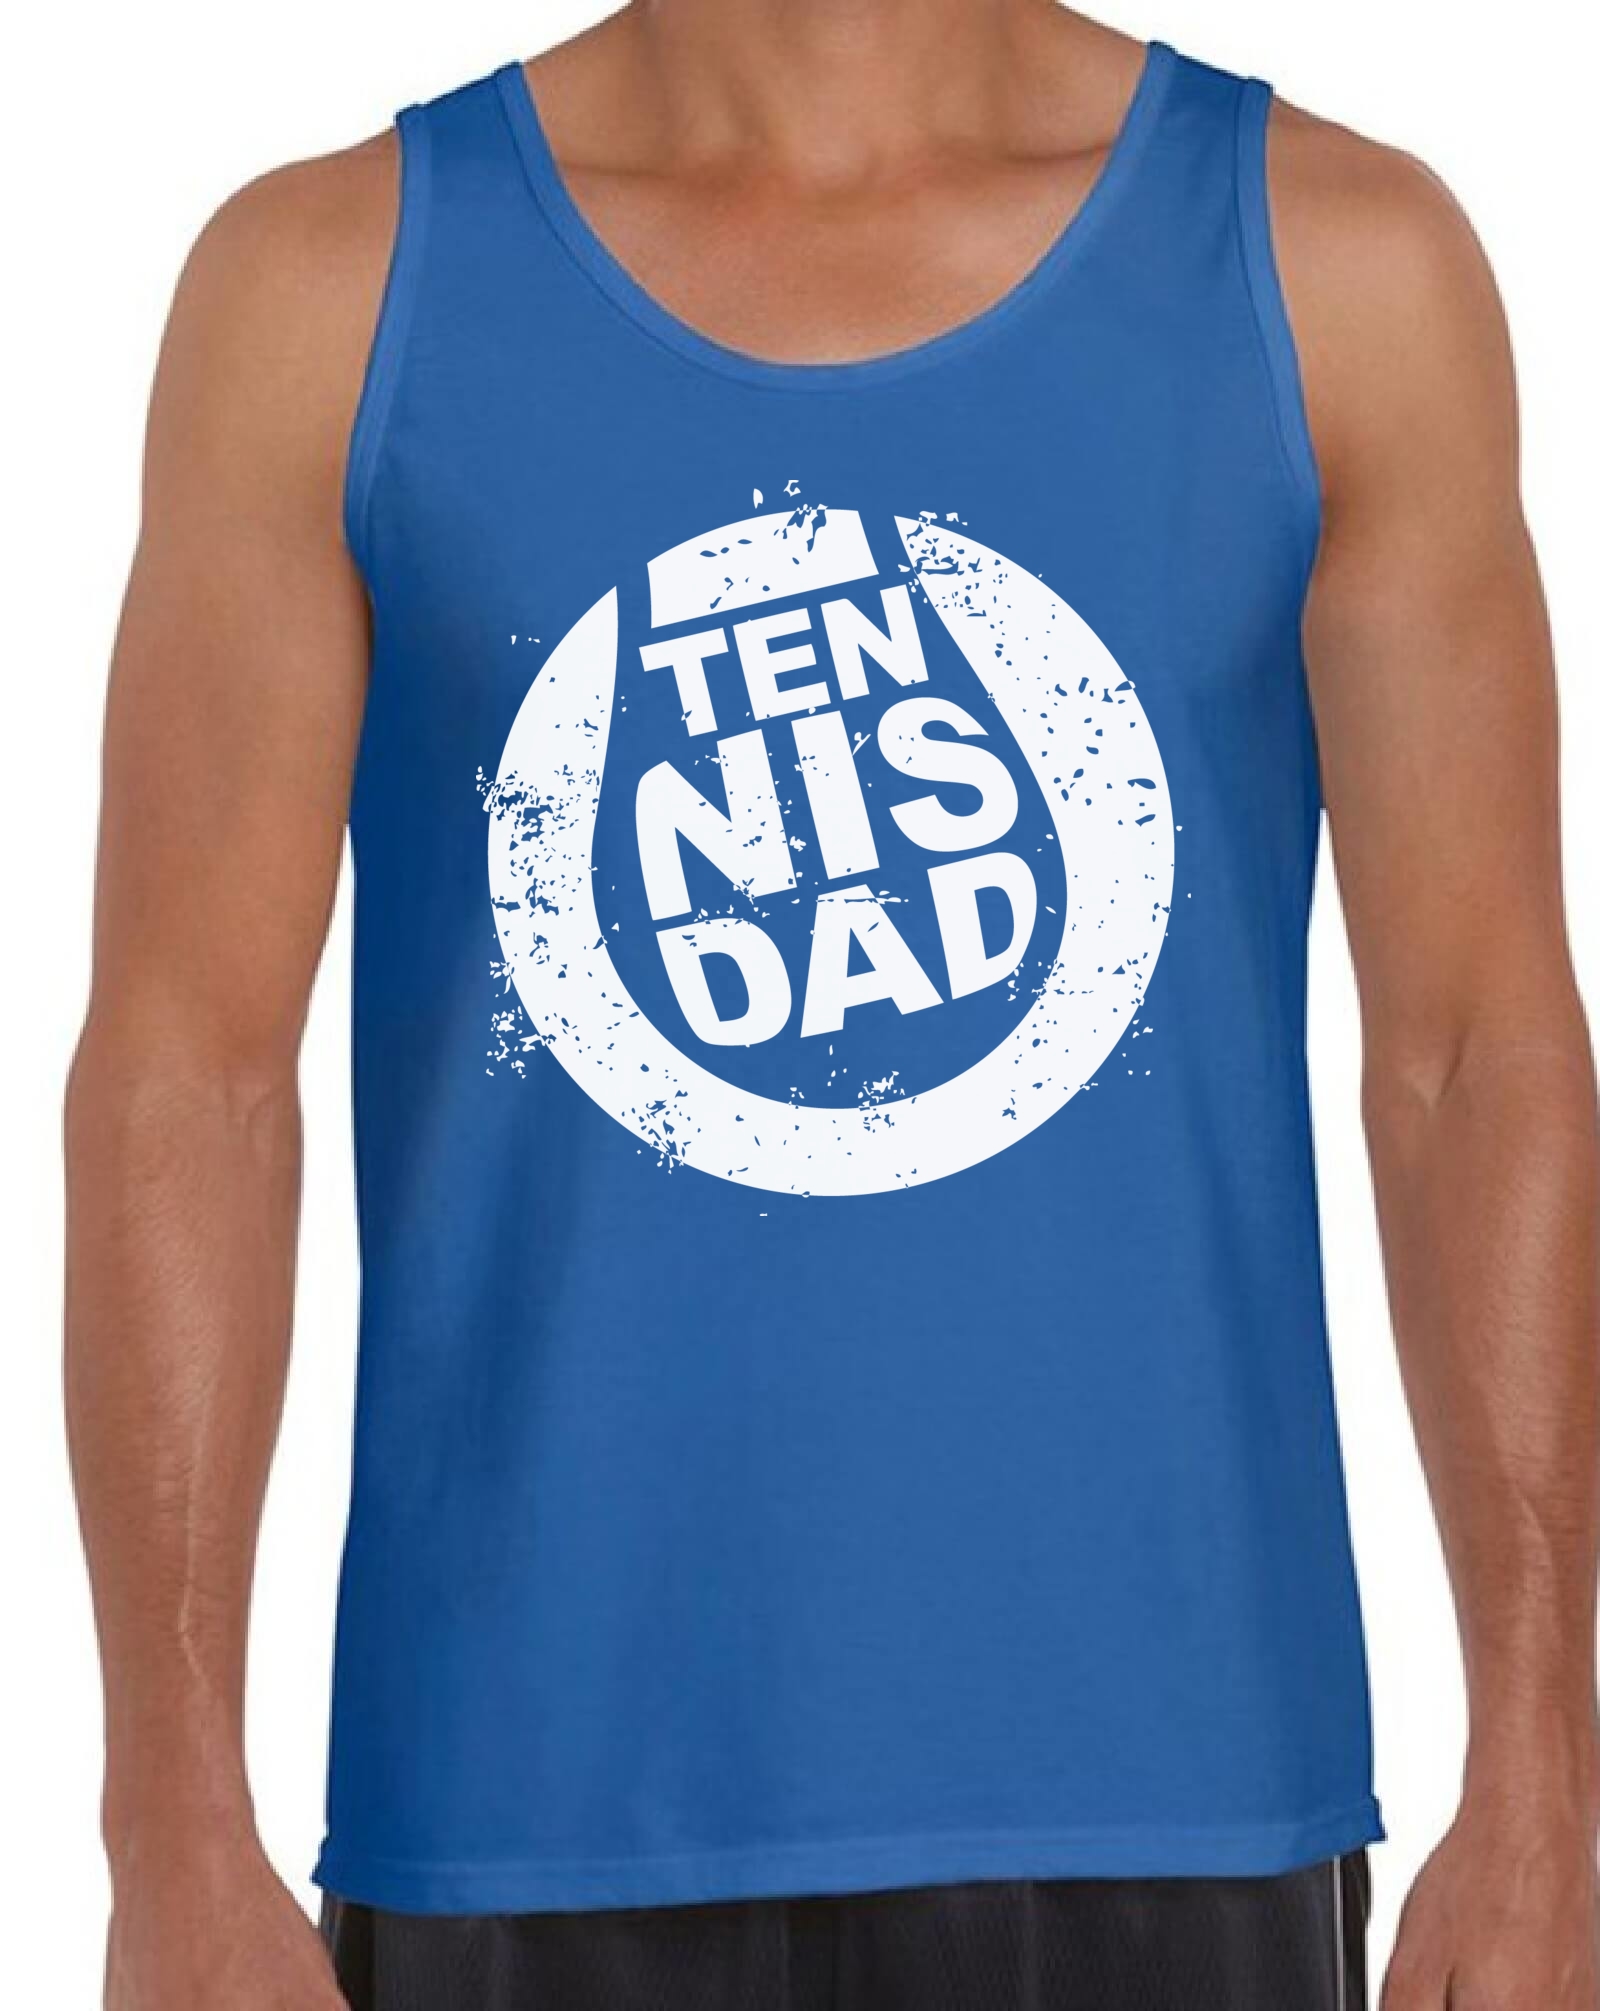 Awkward Styles Men's Tennis Dad Graphic Tank Tops Vintage Tennis Player Sport Dad Father`s Day Gift - image 1 of 4